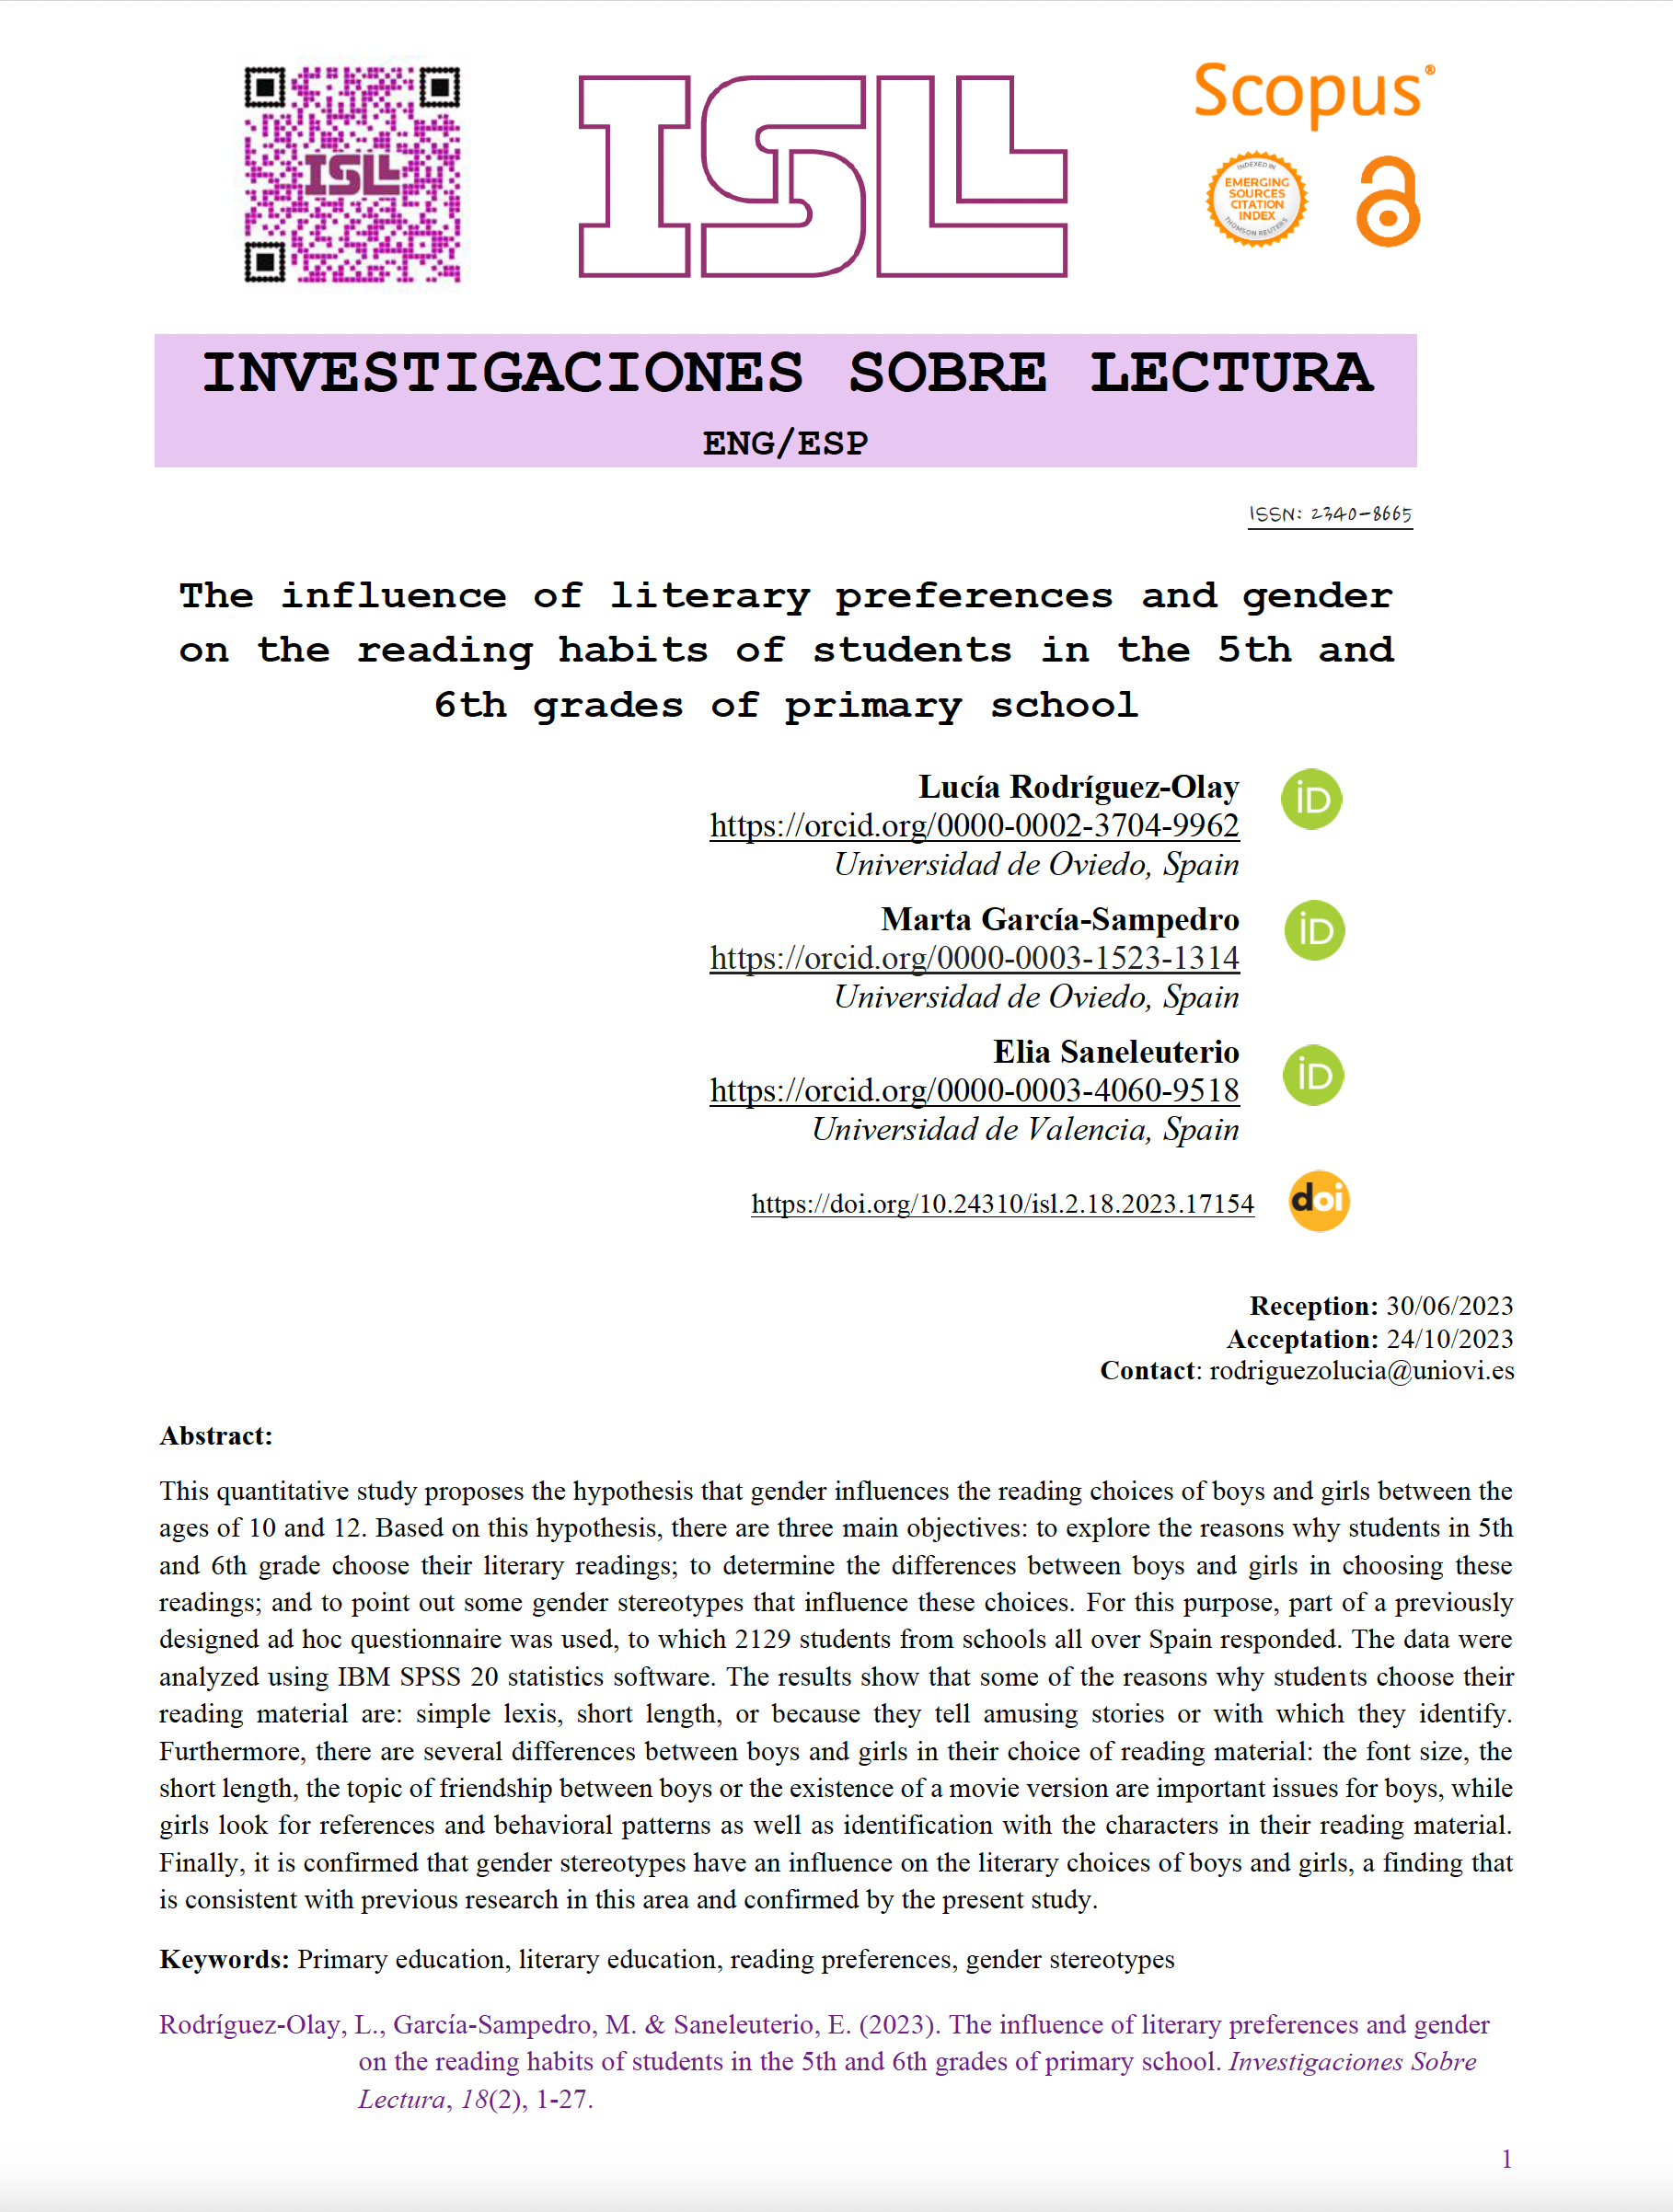 The influence of literary preferences and gender on the reading habits of students in the 5th and 6th grades of primary school